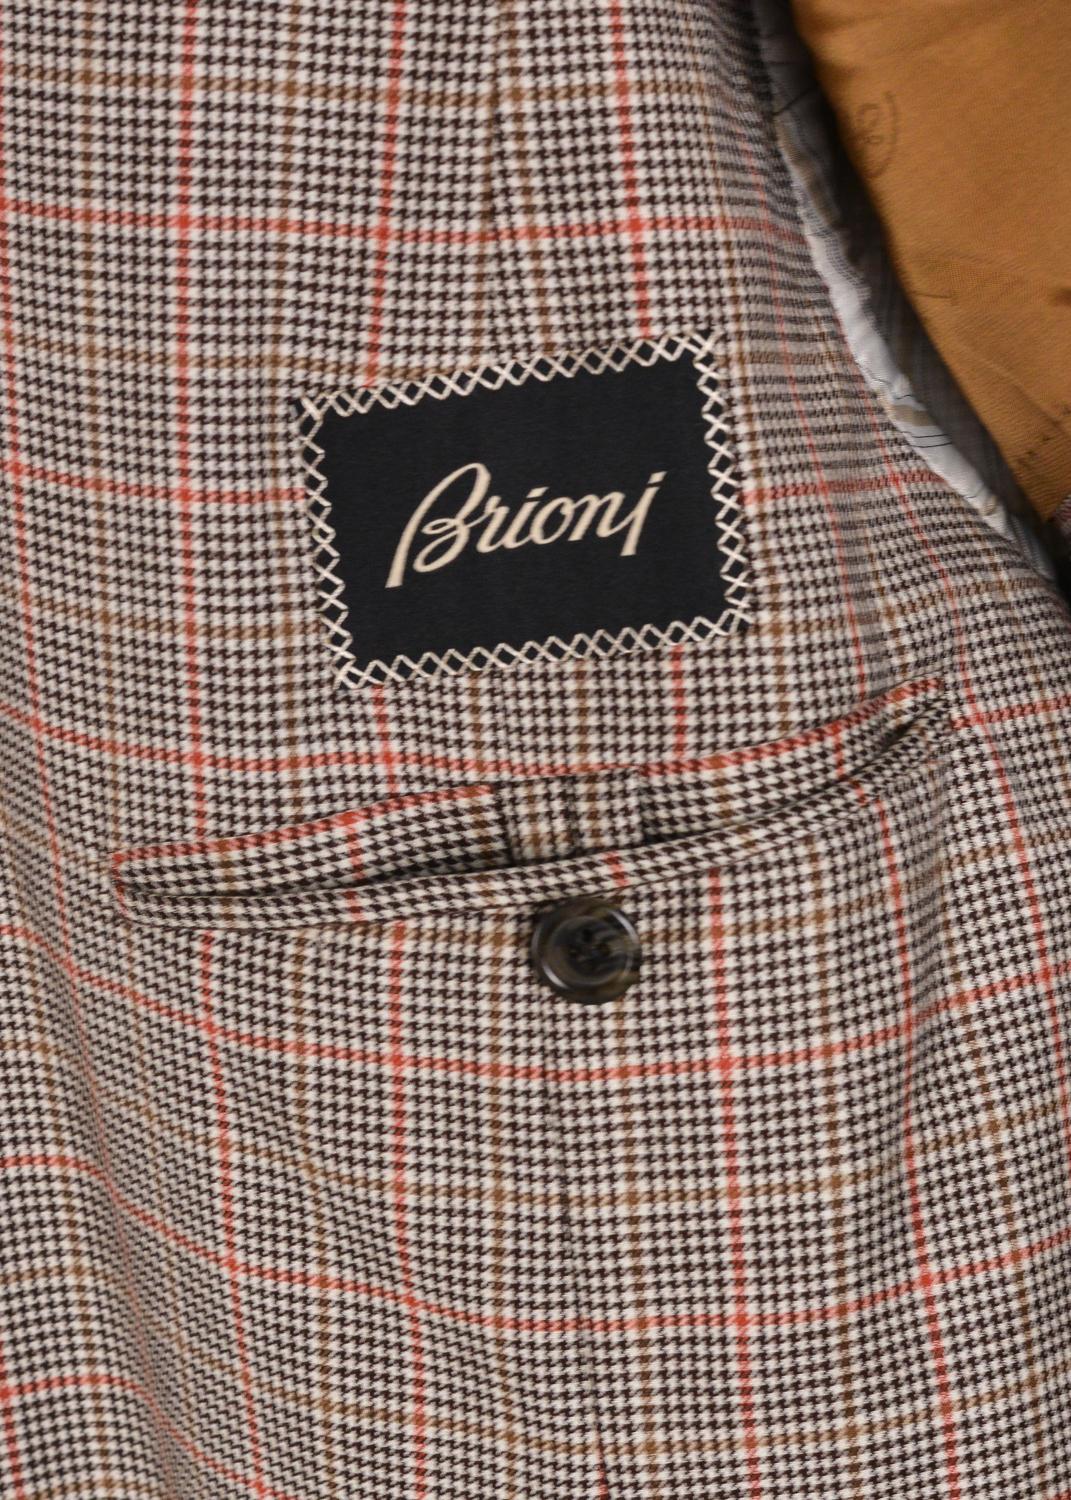 The houndstooth print will forever remain a noble classic especially when reinterpreted by Brioni. This micro hounds-tooth check sportscoat features a medley of dark brown, tan, and sun burnt orange checkered print. This sportscoat would be an